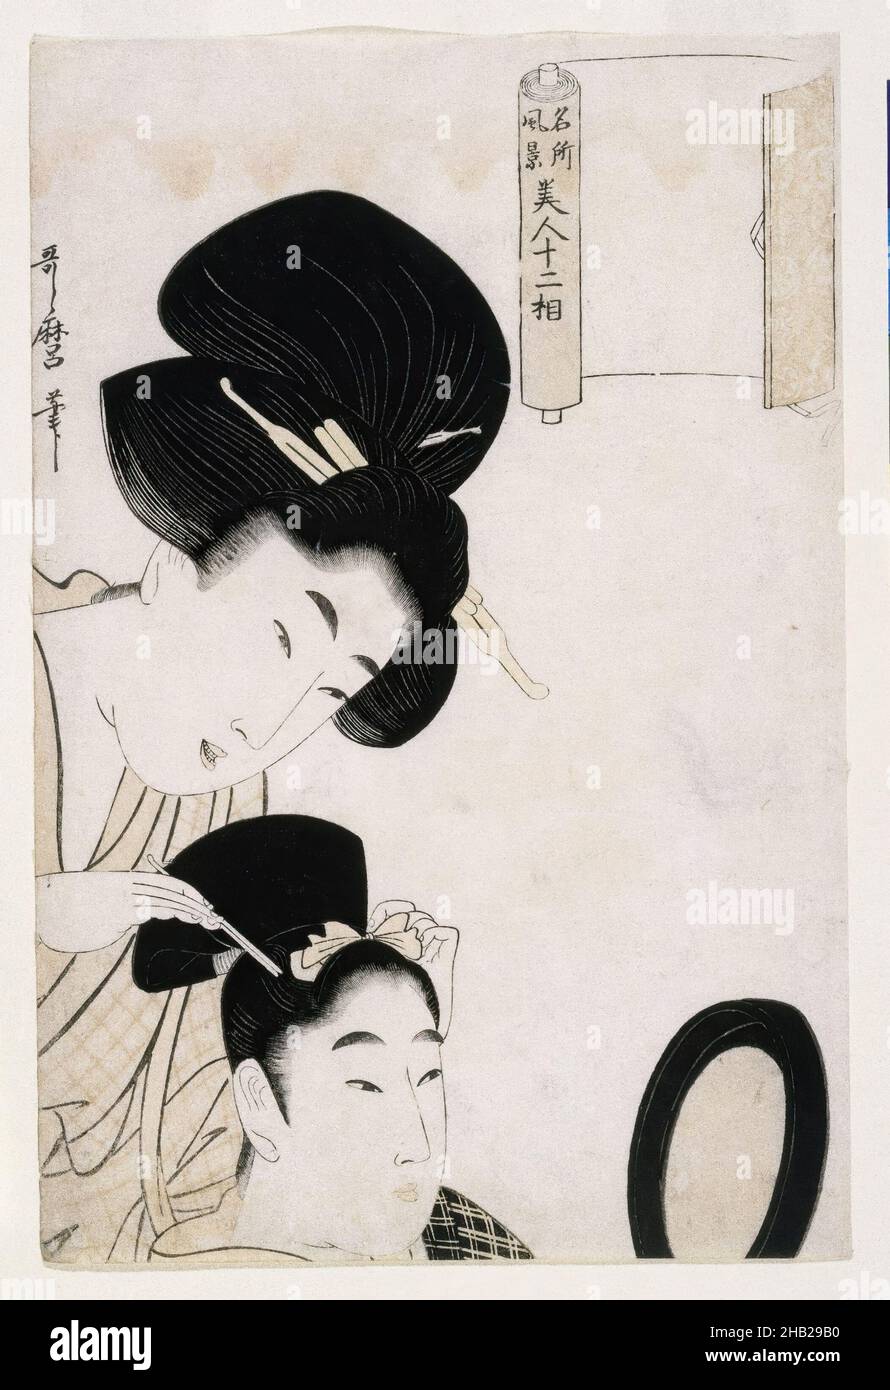 Beauty Fixing Hair, from the series Scenery of Famous Places and Twelve Physiognomies of Beauties, Kitagawa Utamaro, Japanese, 1753-1806, Color woodblock print on paper, Japan, ca. 1803, Edo Period, 14 15/16 x 9 15/16 in., 38.0 x 25.2 cm, geisha, girls, haircut, japanese, mirror Stock Photo